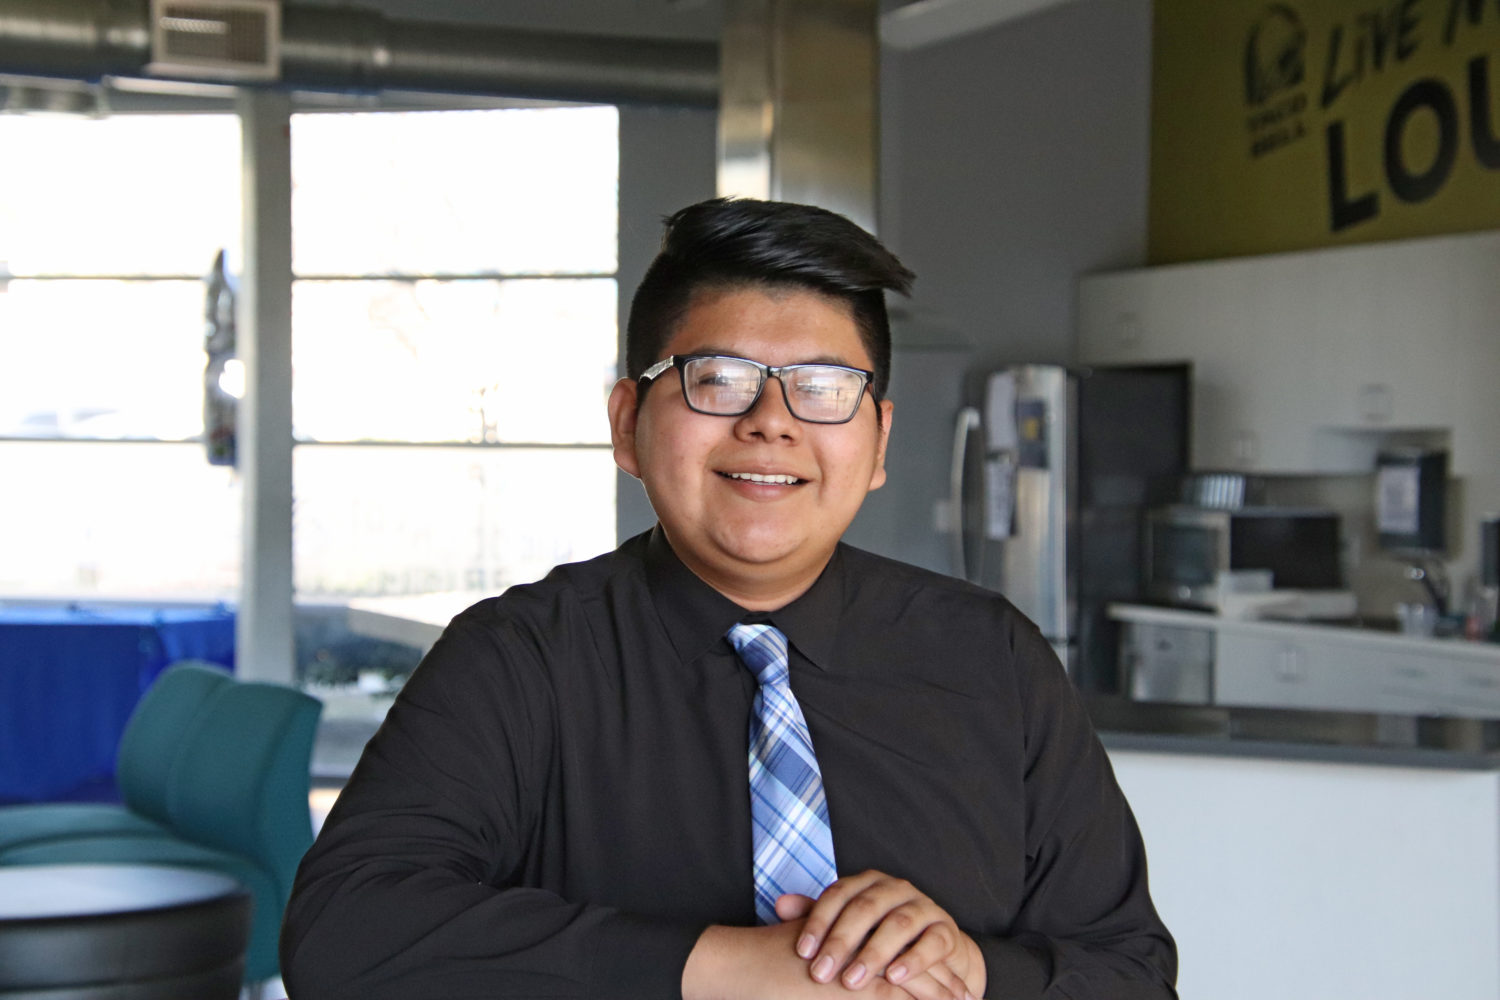 Nicolas Sanchez, our 2020 Youth of the Year, poses in Joe's Garage Teen Center at the Santa Ana Club